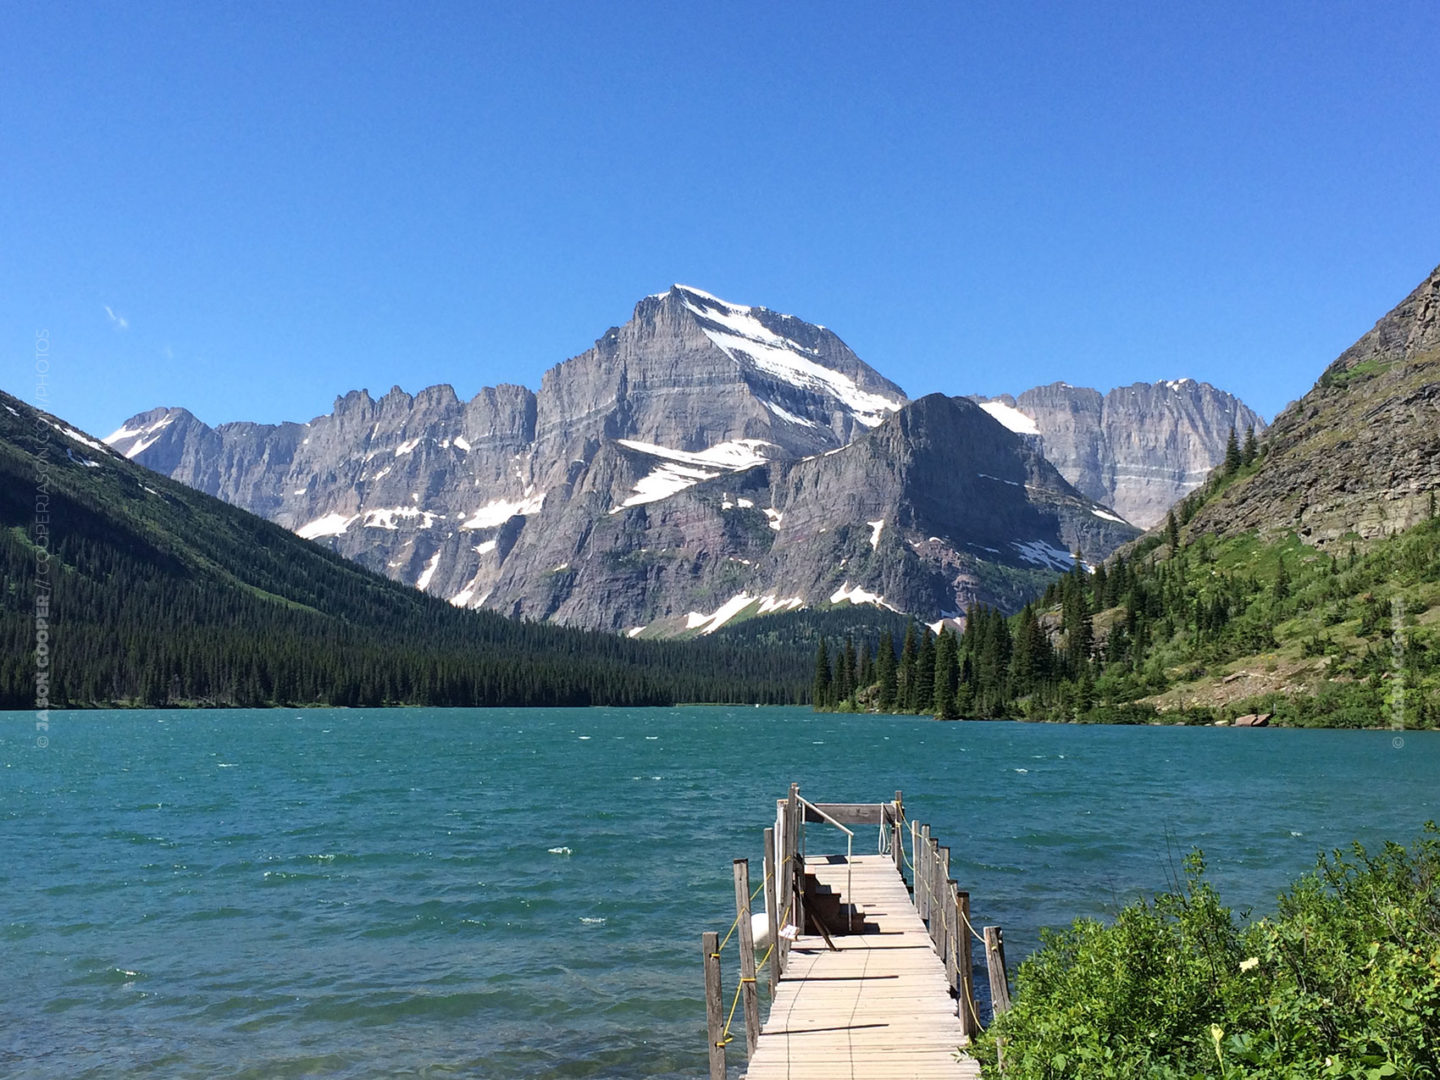 photos of the boat dock on Lake Josephine in Glacier National Park